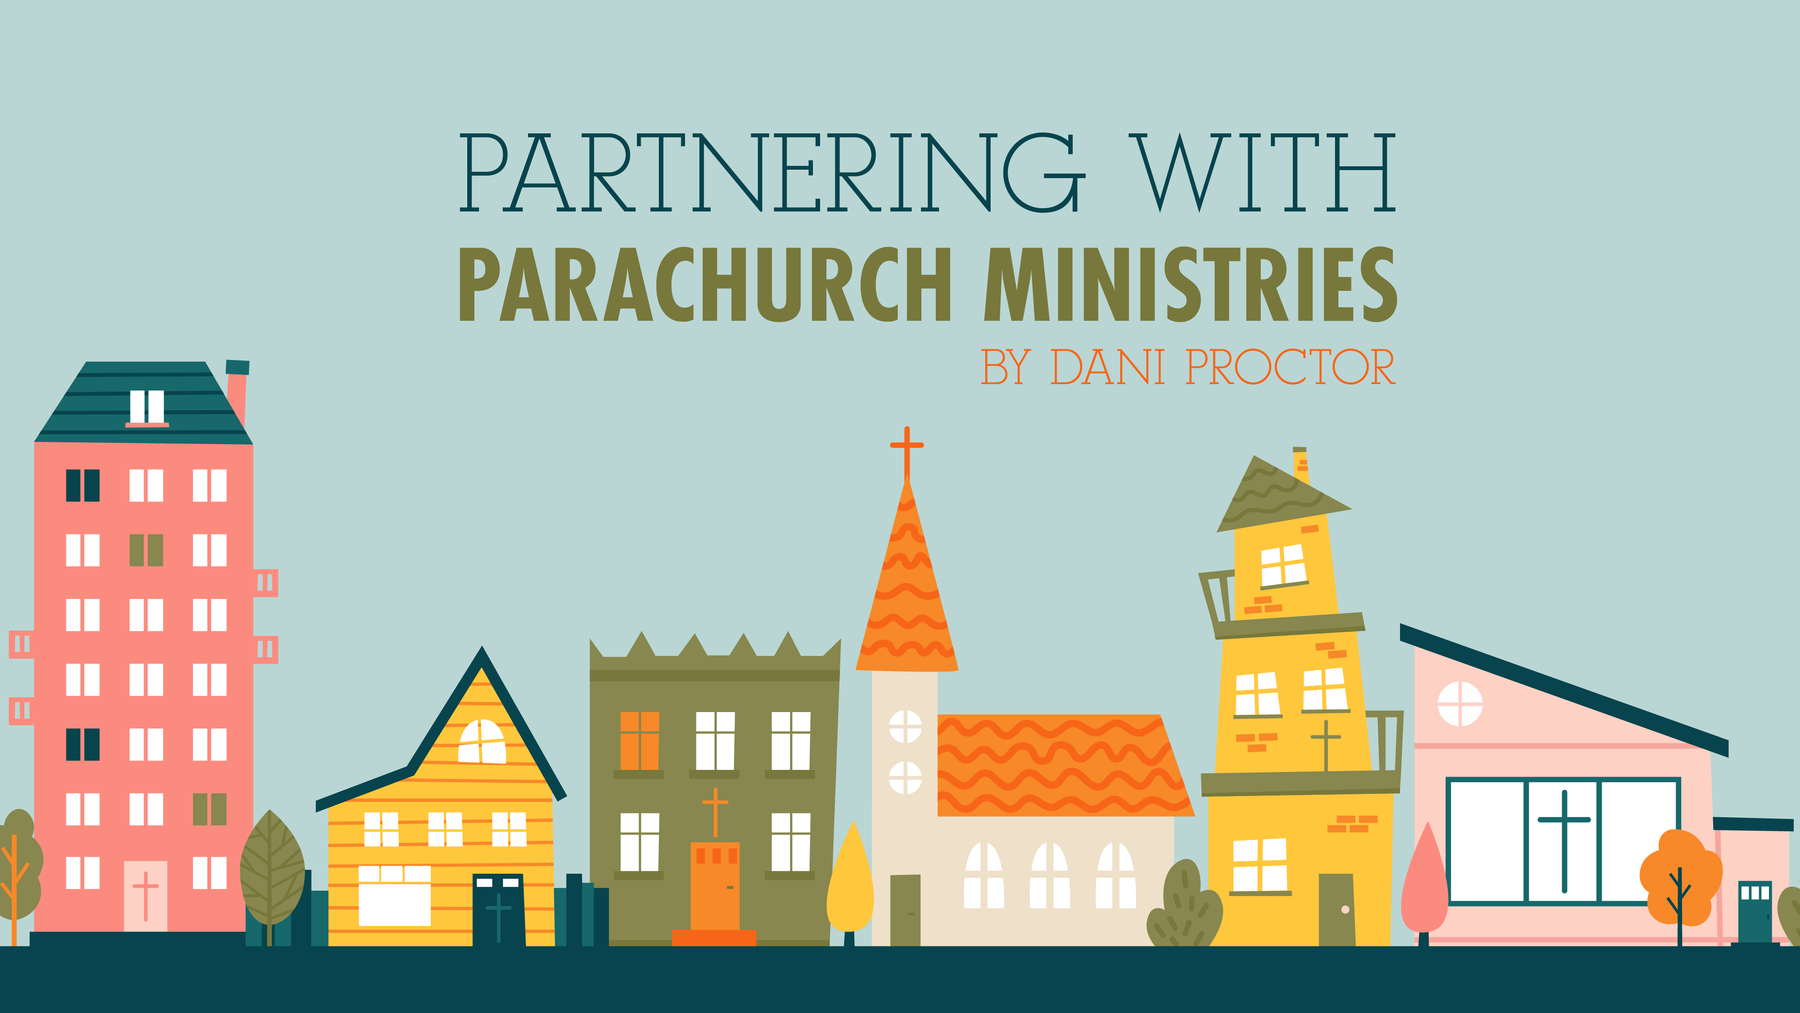 Partnering with Parachurch Ministries